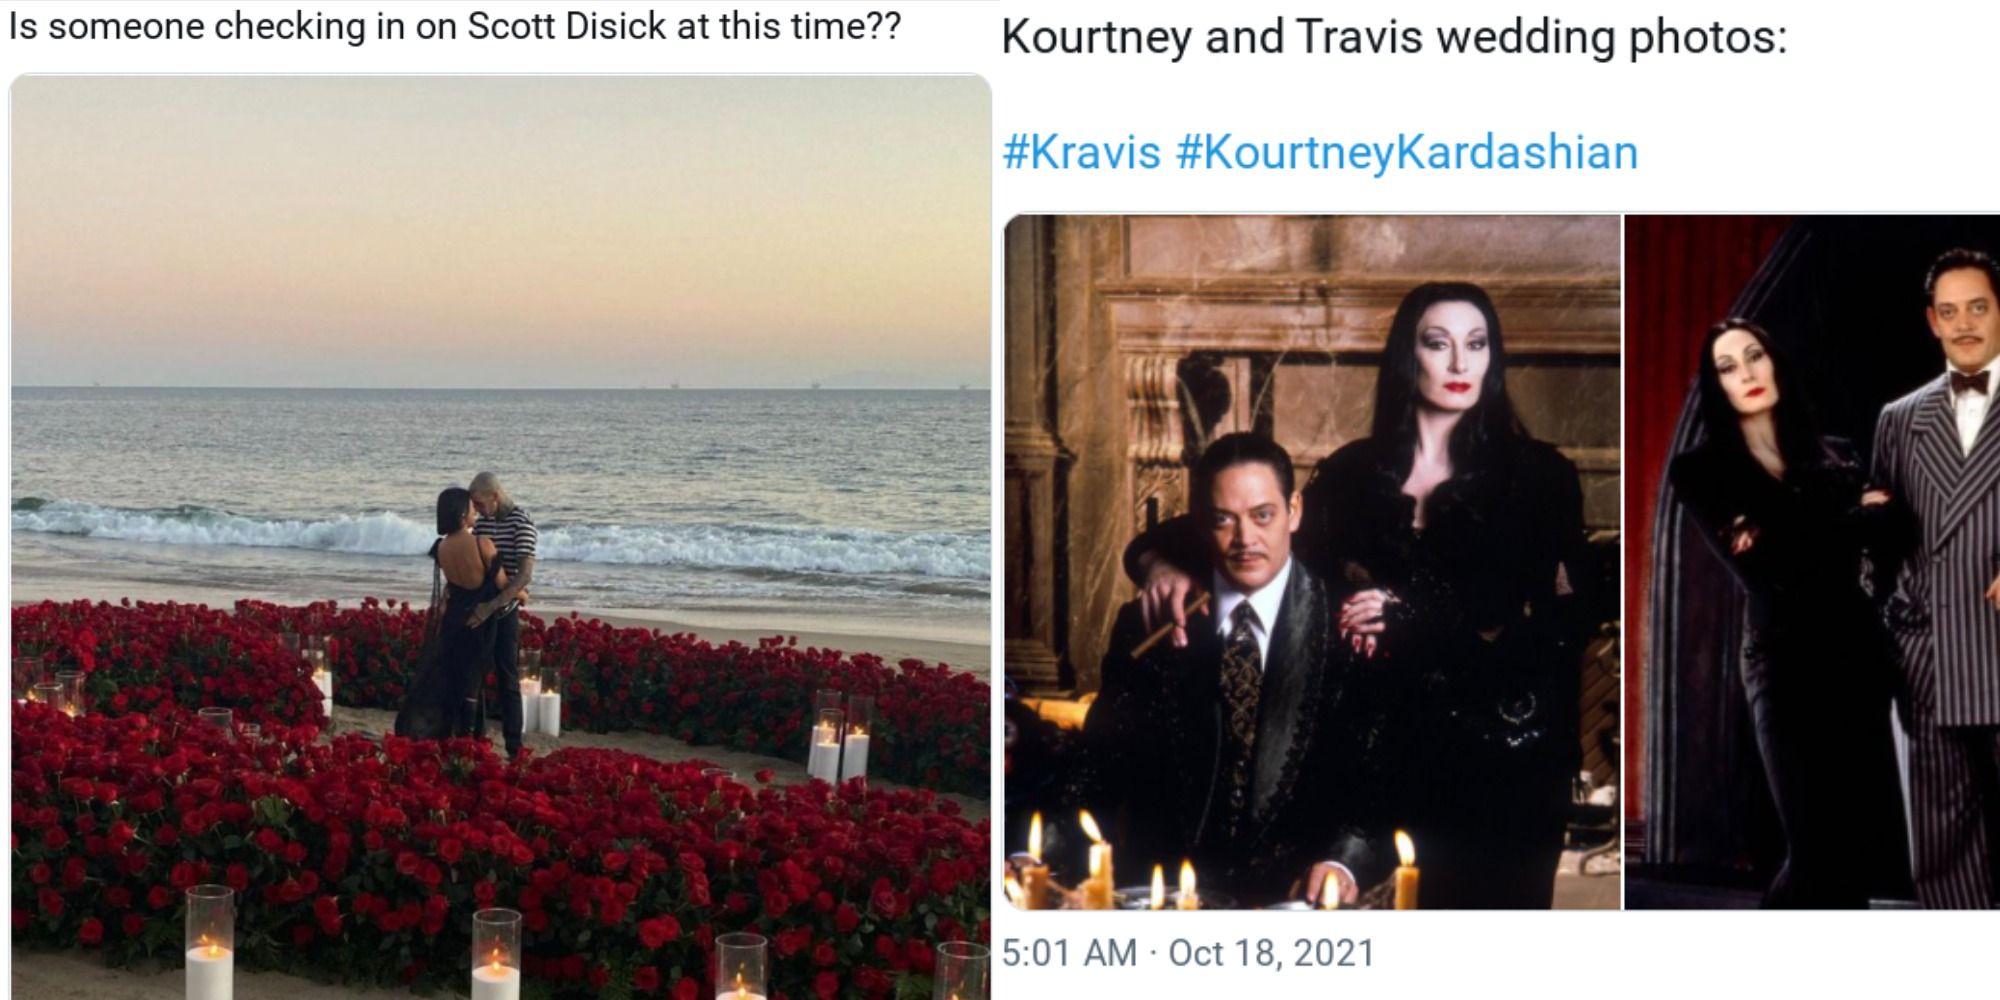 Split image of a meme featuring Kourtney Kardashian and Travis Barker's engagement photos beside a meme of their wedding photos featuring Gomez and Morticia Addams